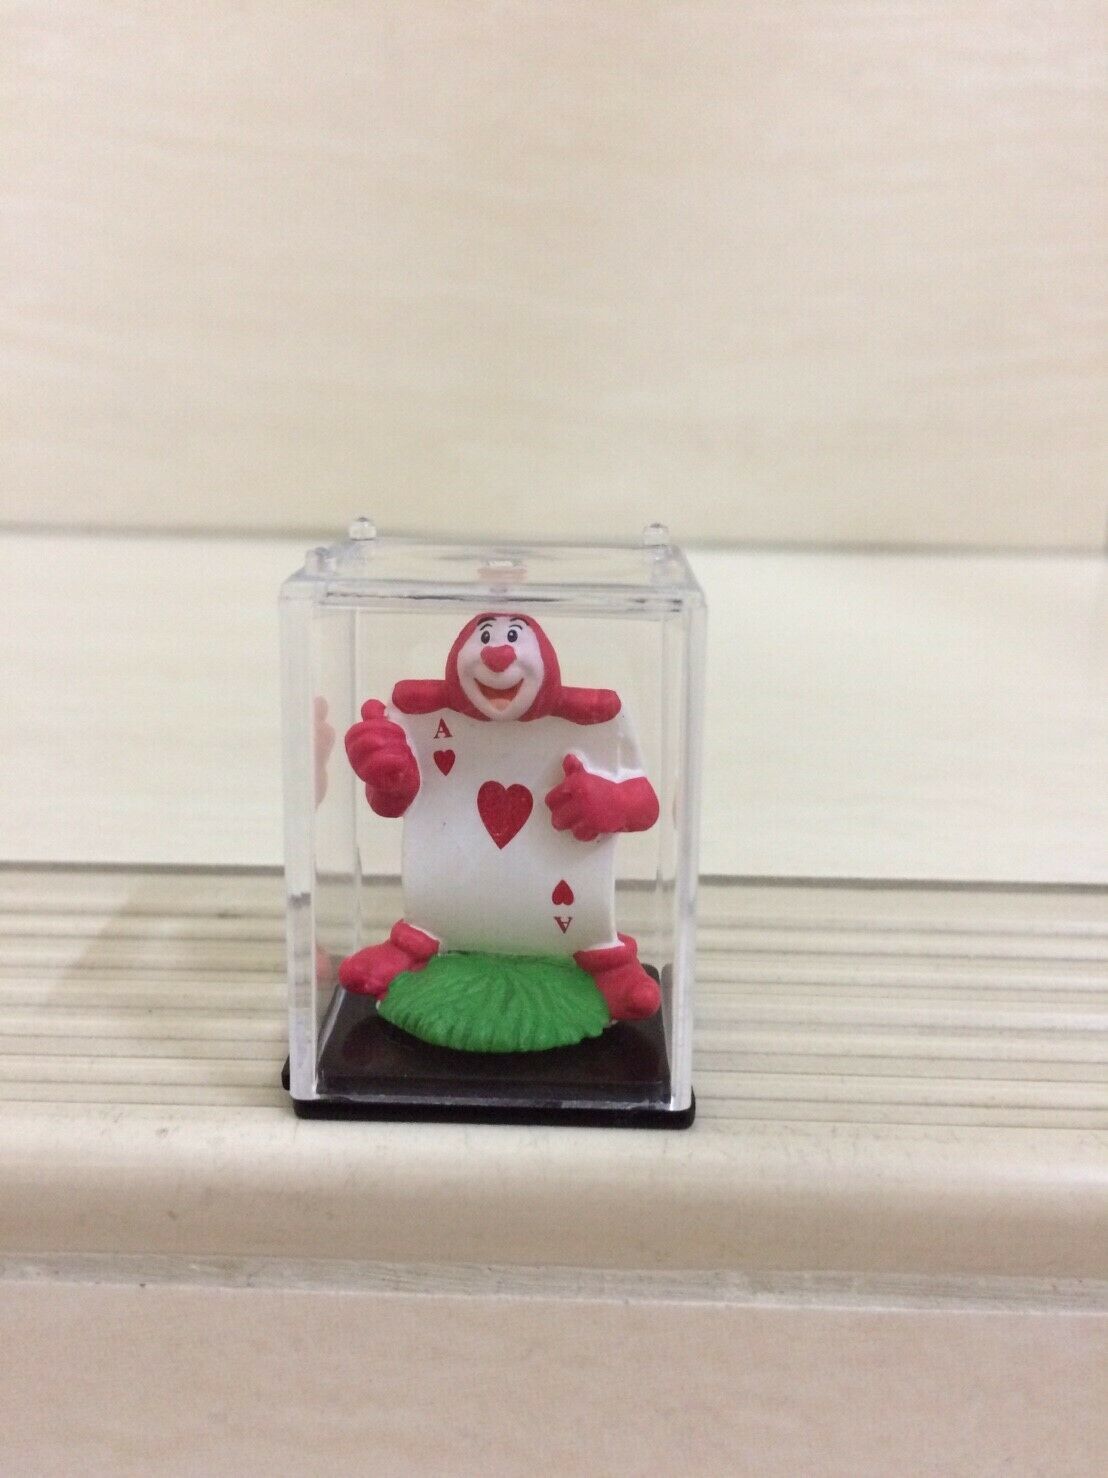 Primary image for Disney Heart Red Card Figure from Alice in Wonderland. Mini Size. Very RARE item